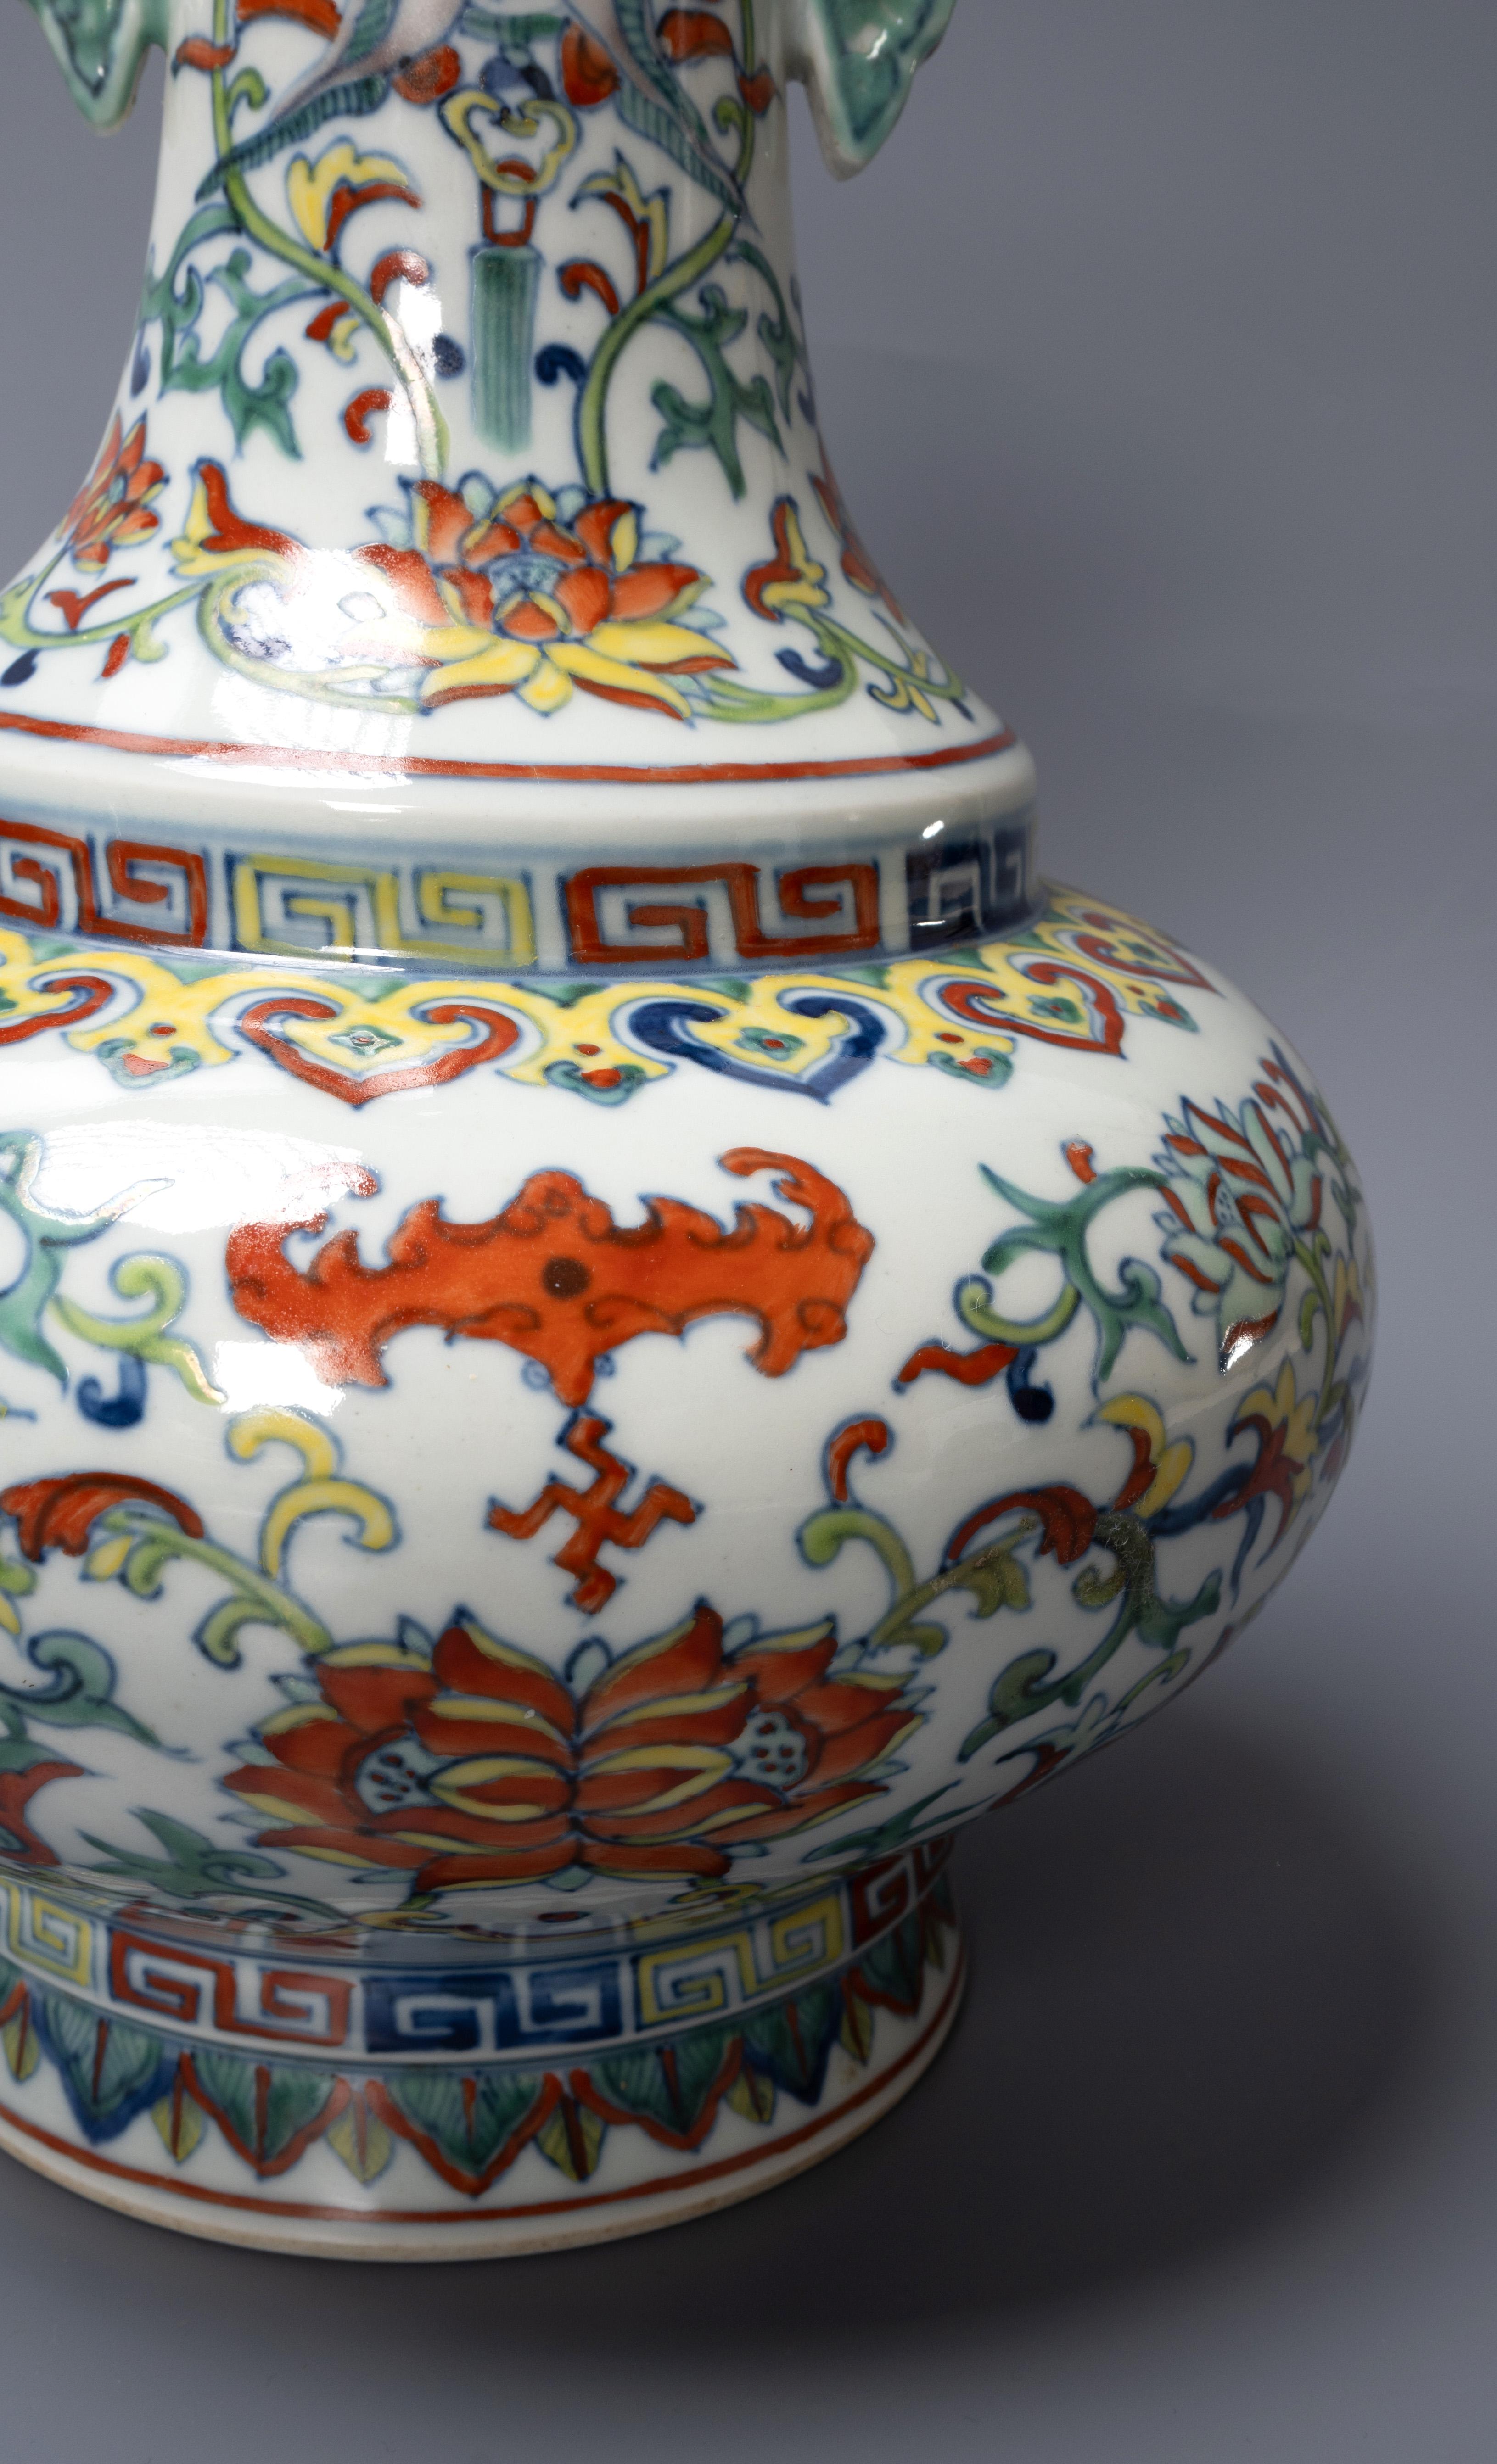 A CHINESE DOUCAI 'BATS AND LOTUS' VASE.
Yongzheng mark but later, the base with an apocryphal six-character mark, 
31cm high. The twin-handled vase painted with bats flying over large lotus flowers issuing from curling leafy stems.